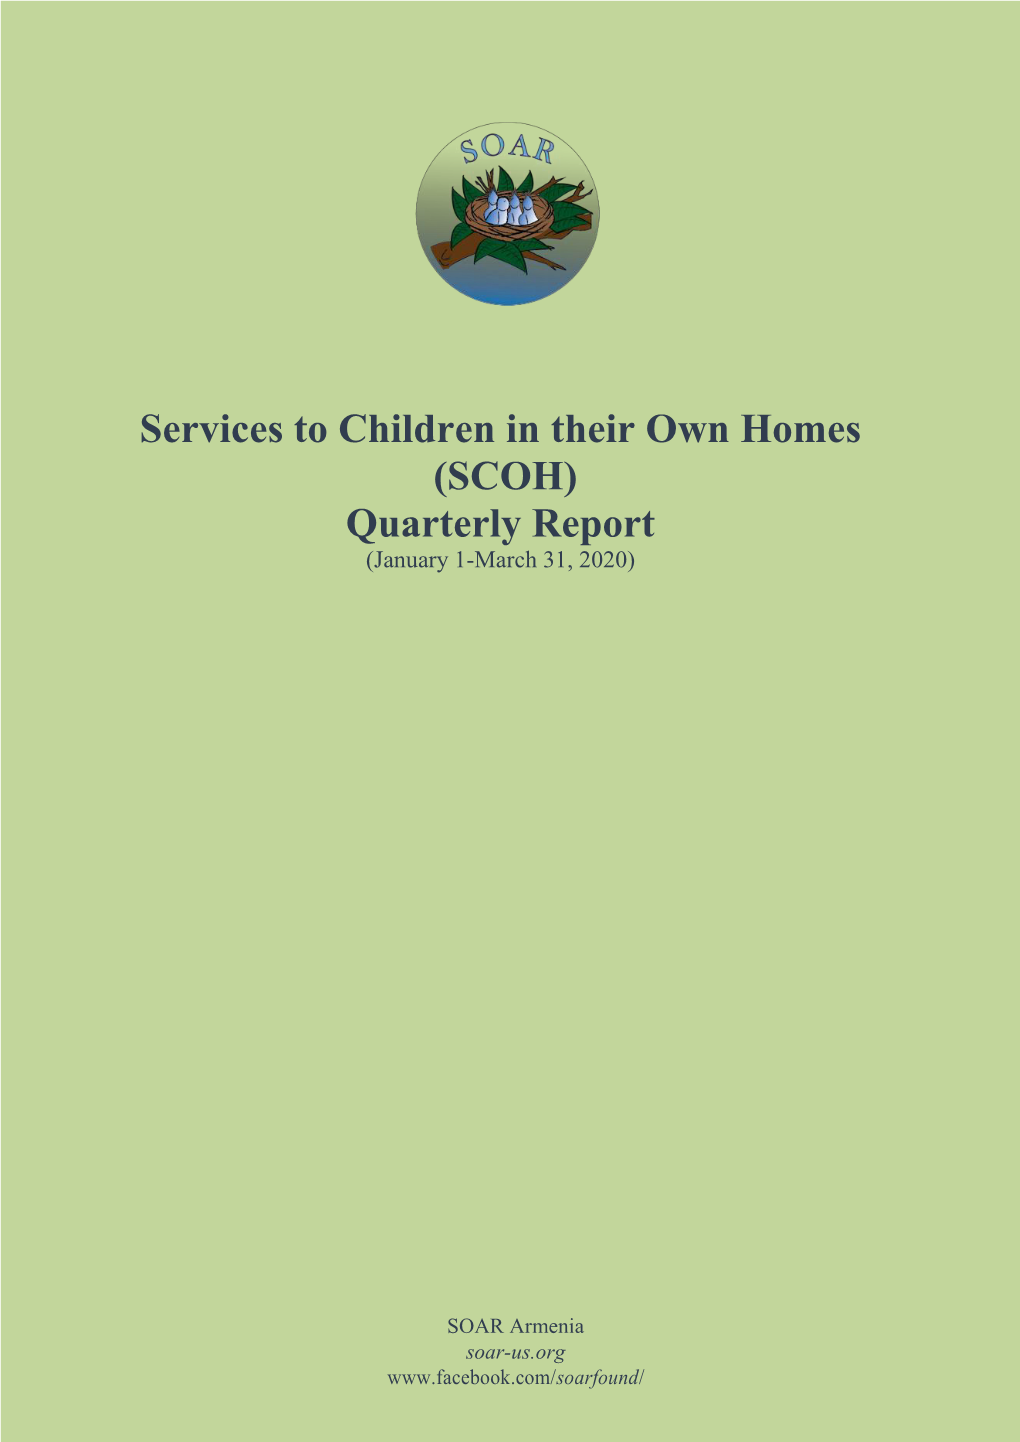 Services to Children in Their Own Homes (SCOH) Quarterly Report (January 1-March 31, 2020)